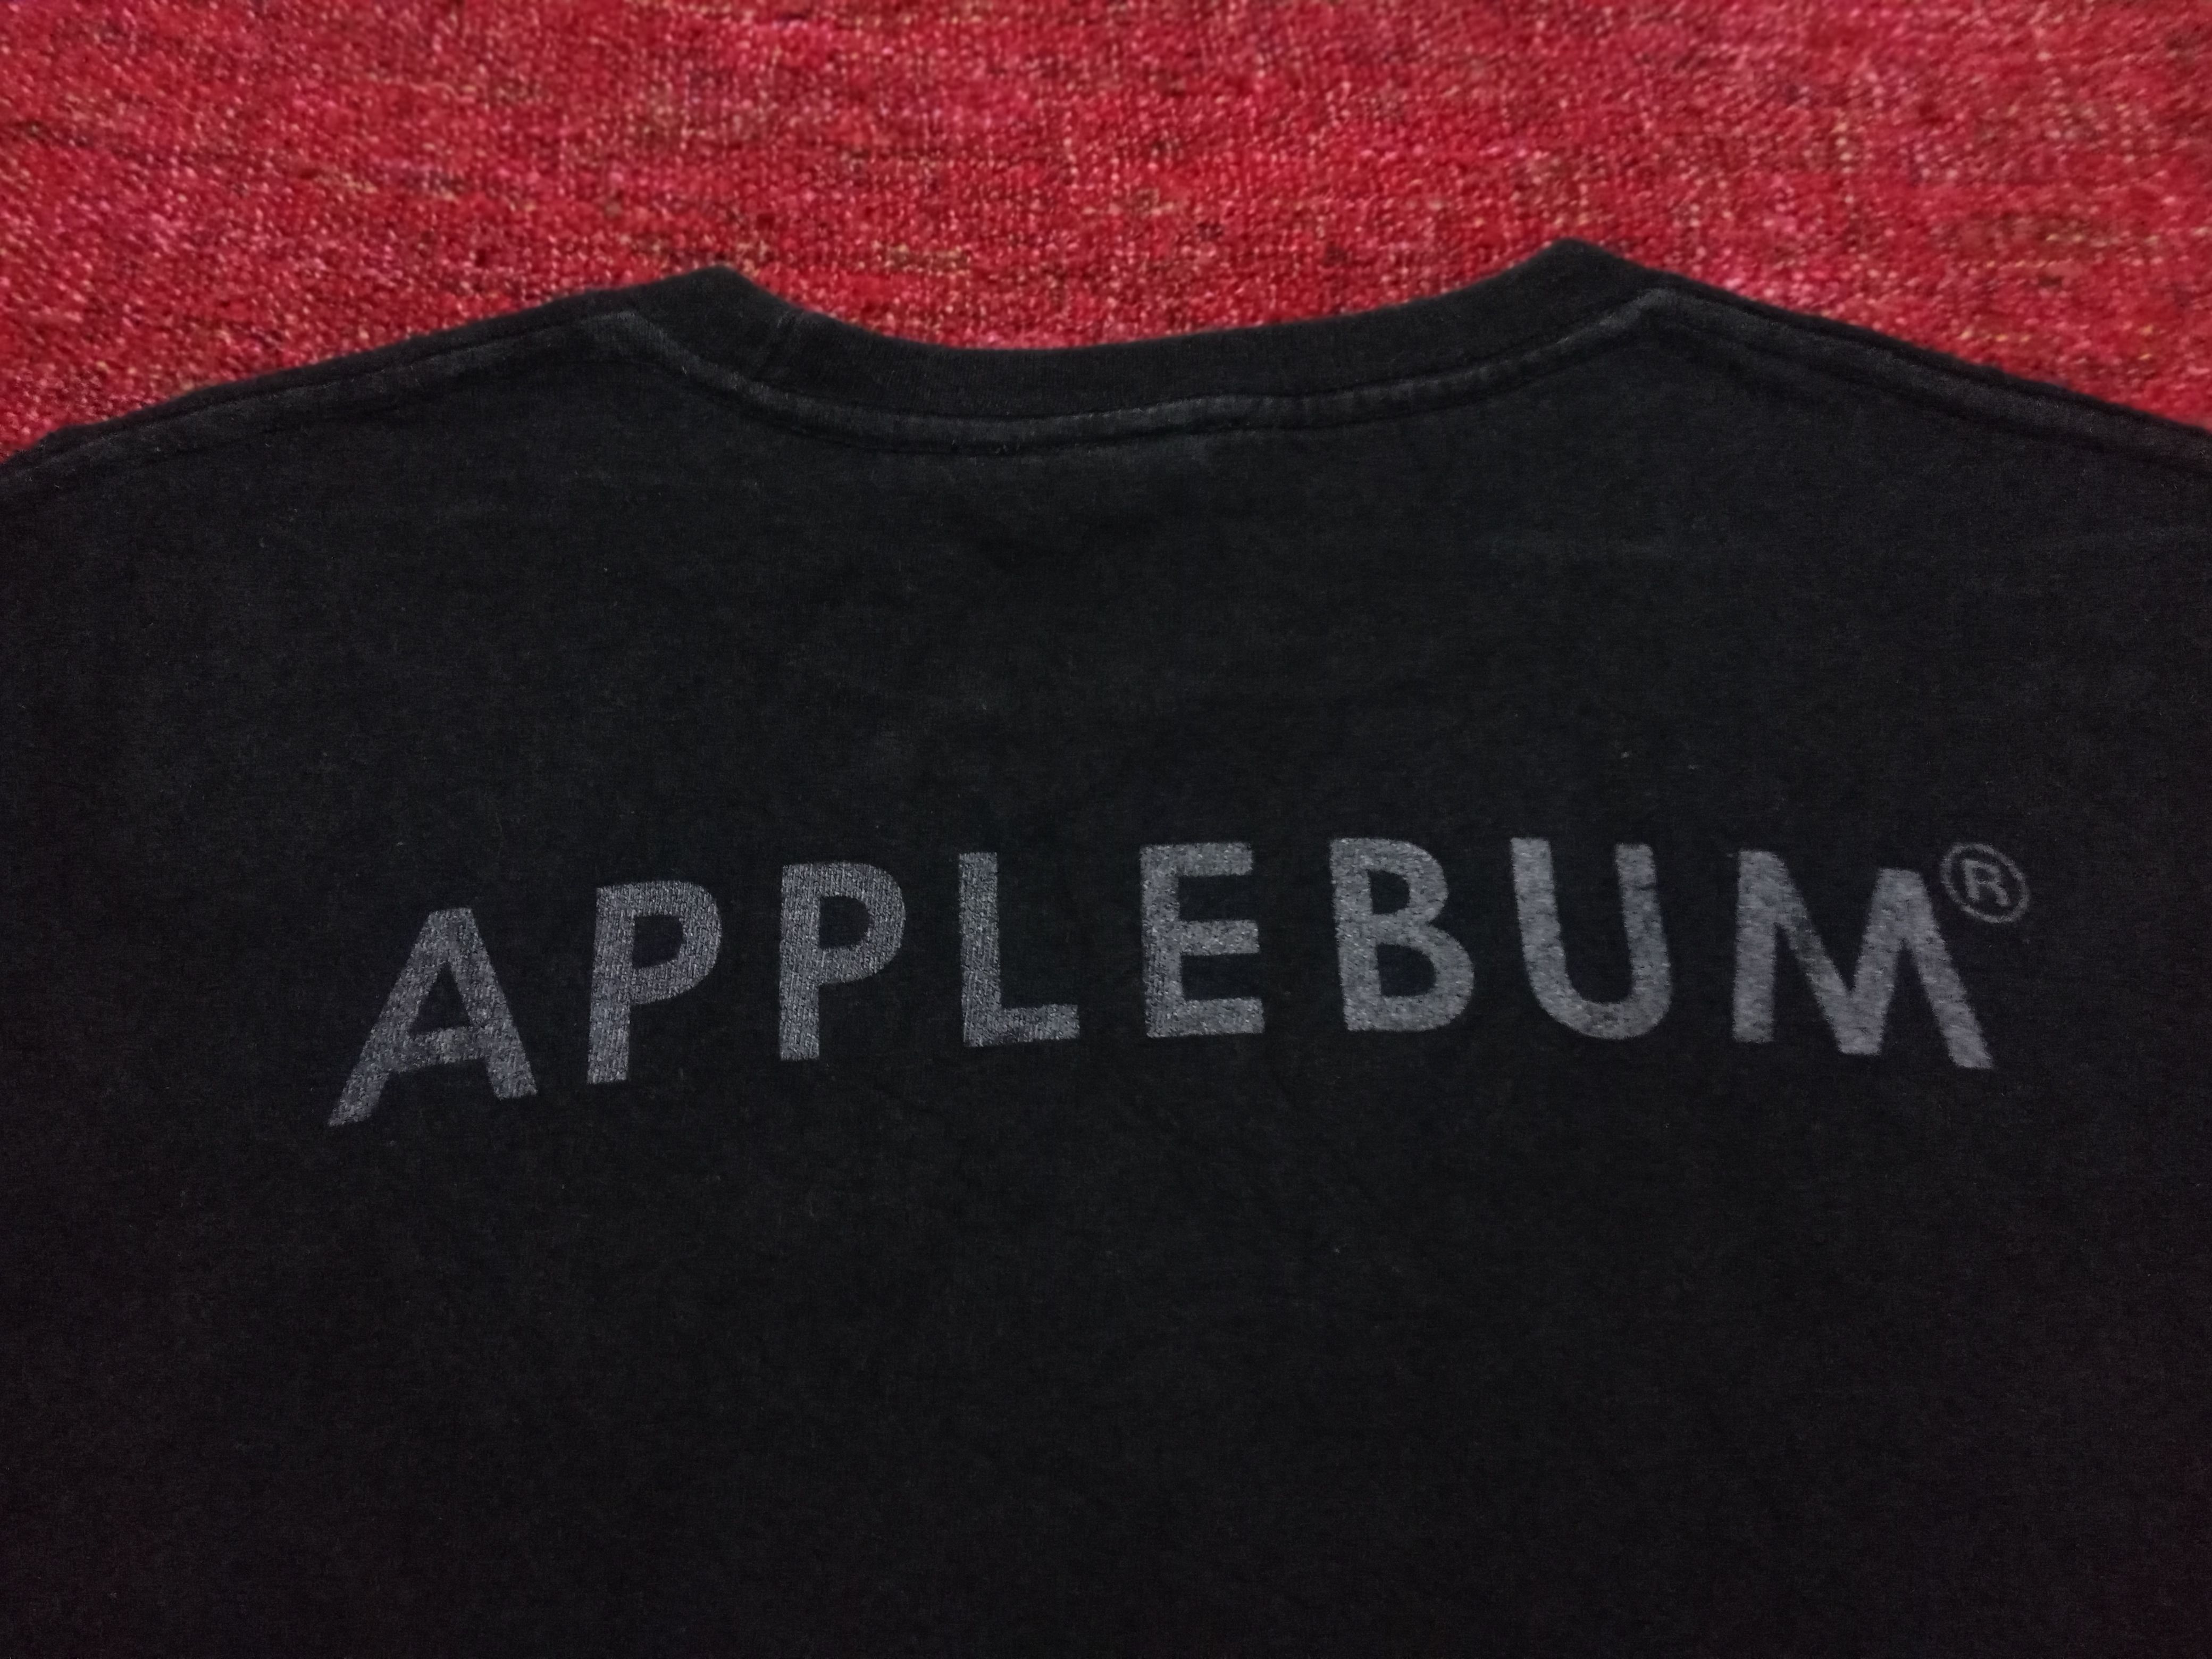 Japanese Brand Rare Applebum Japanese streetwear tribute to Ice cube Tee Size US M / EU 48-50 / 2 - 2 Preview